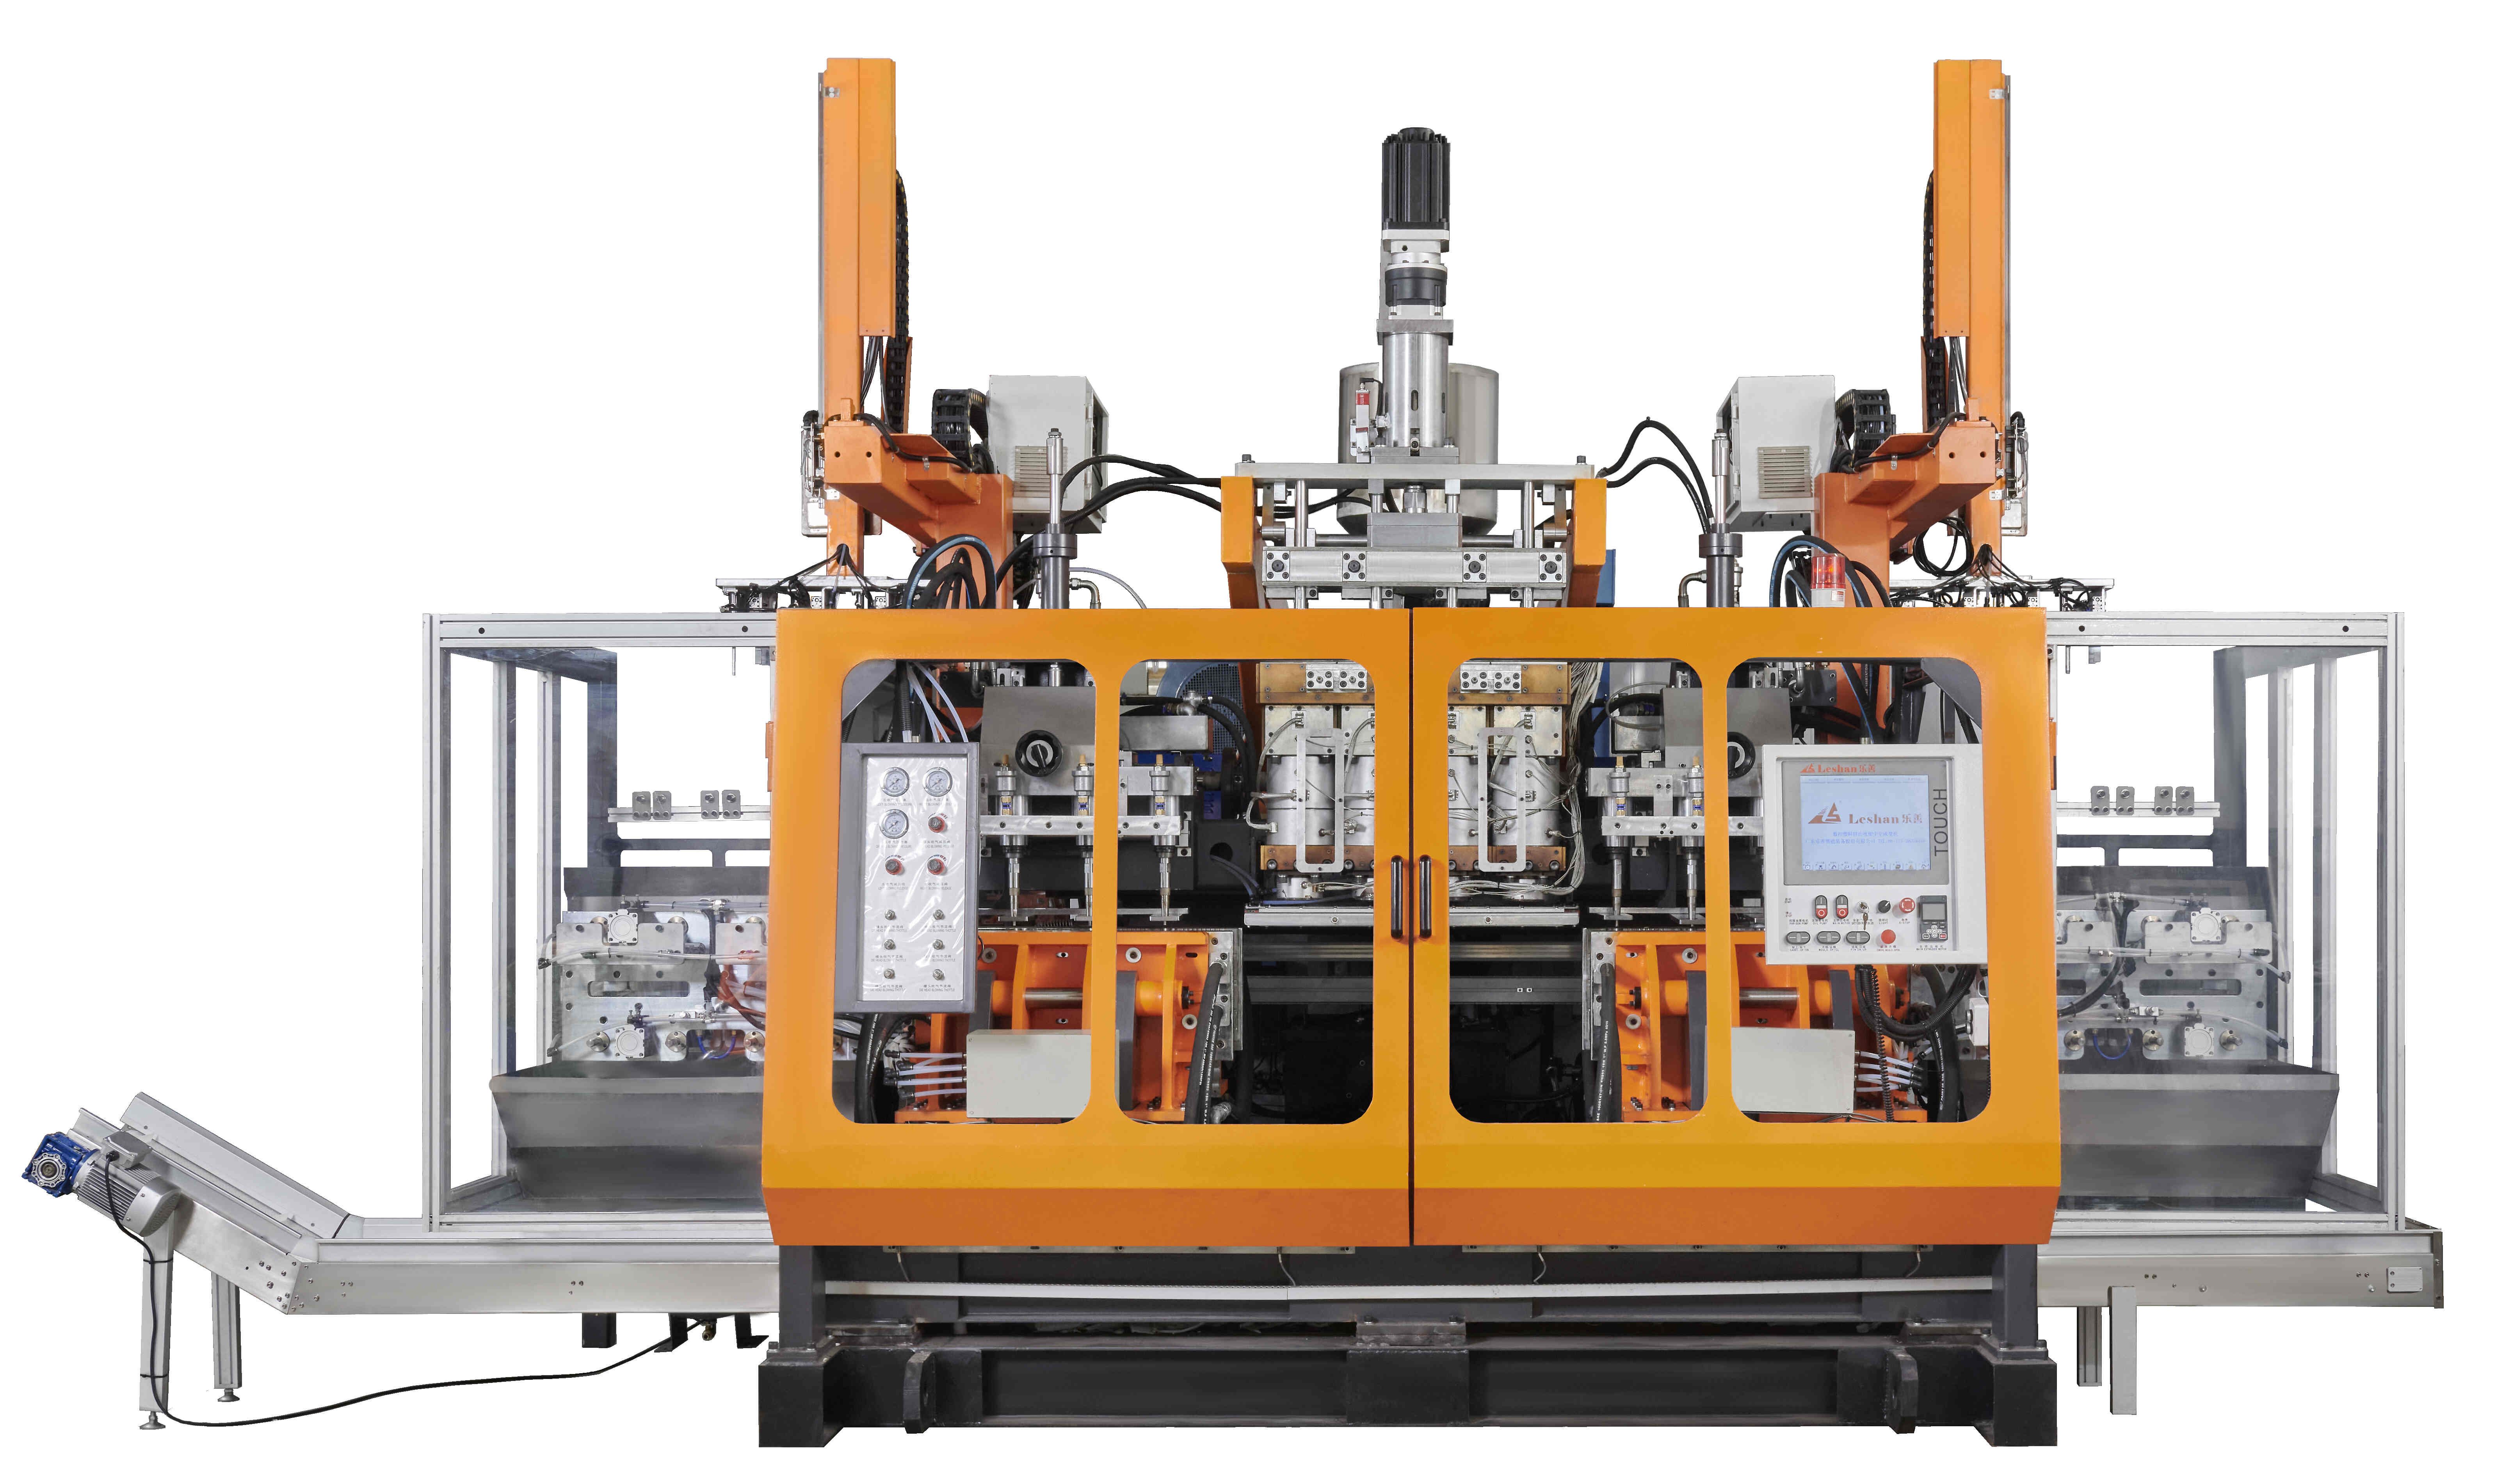 What is the level of automation of extrusion blow mold machine?